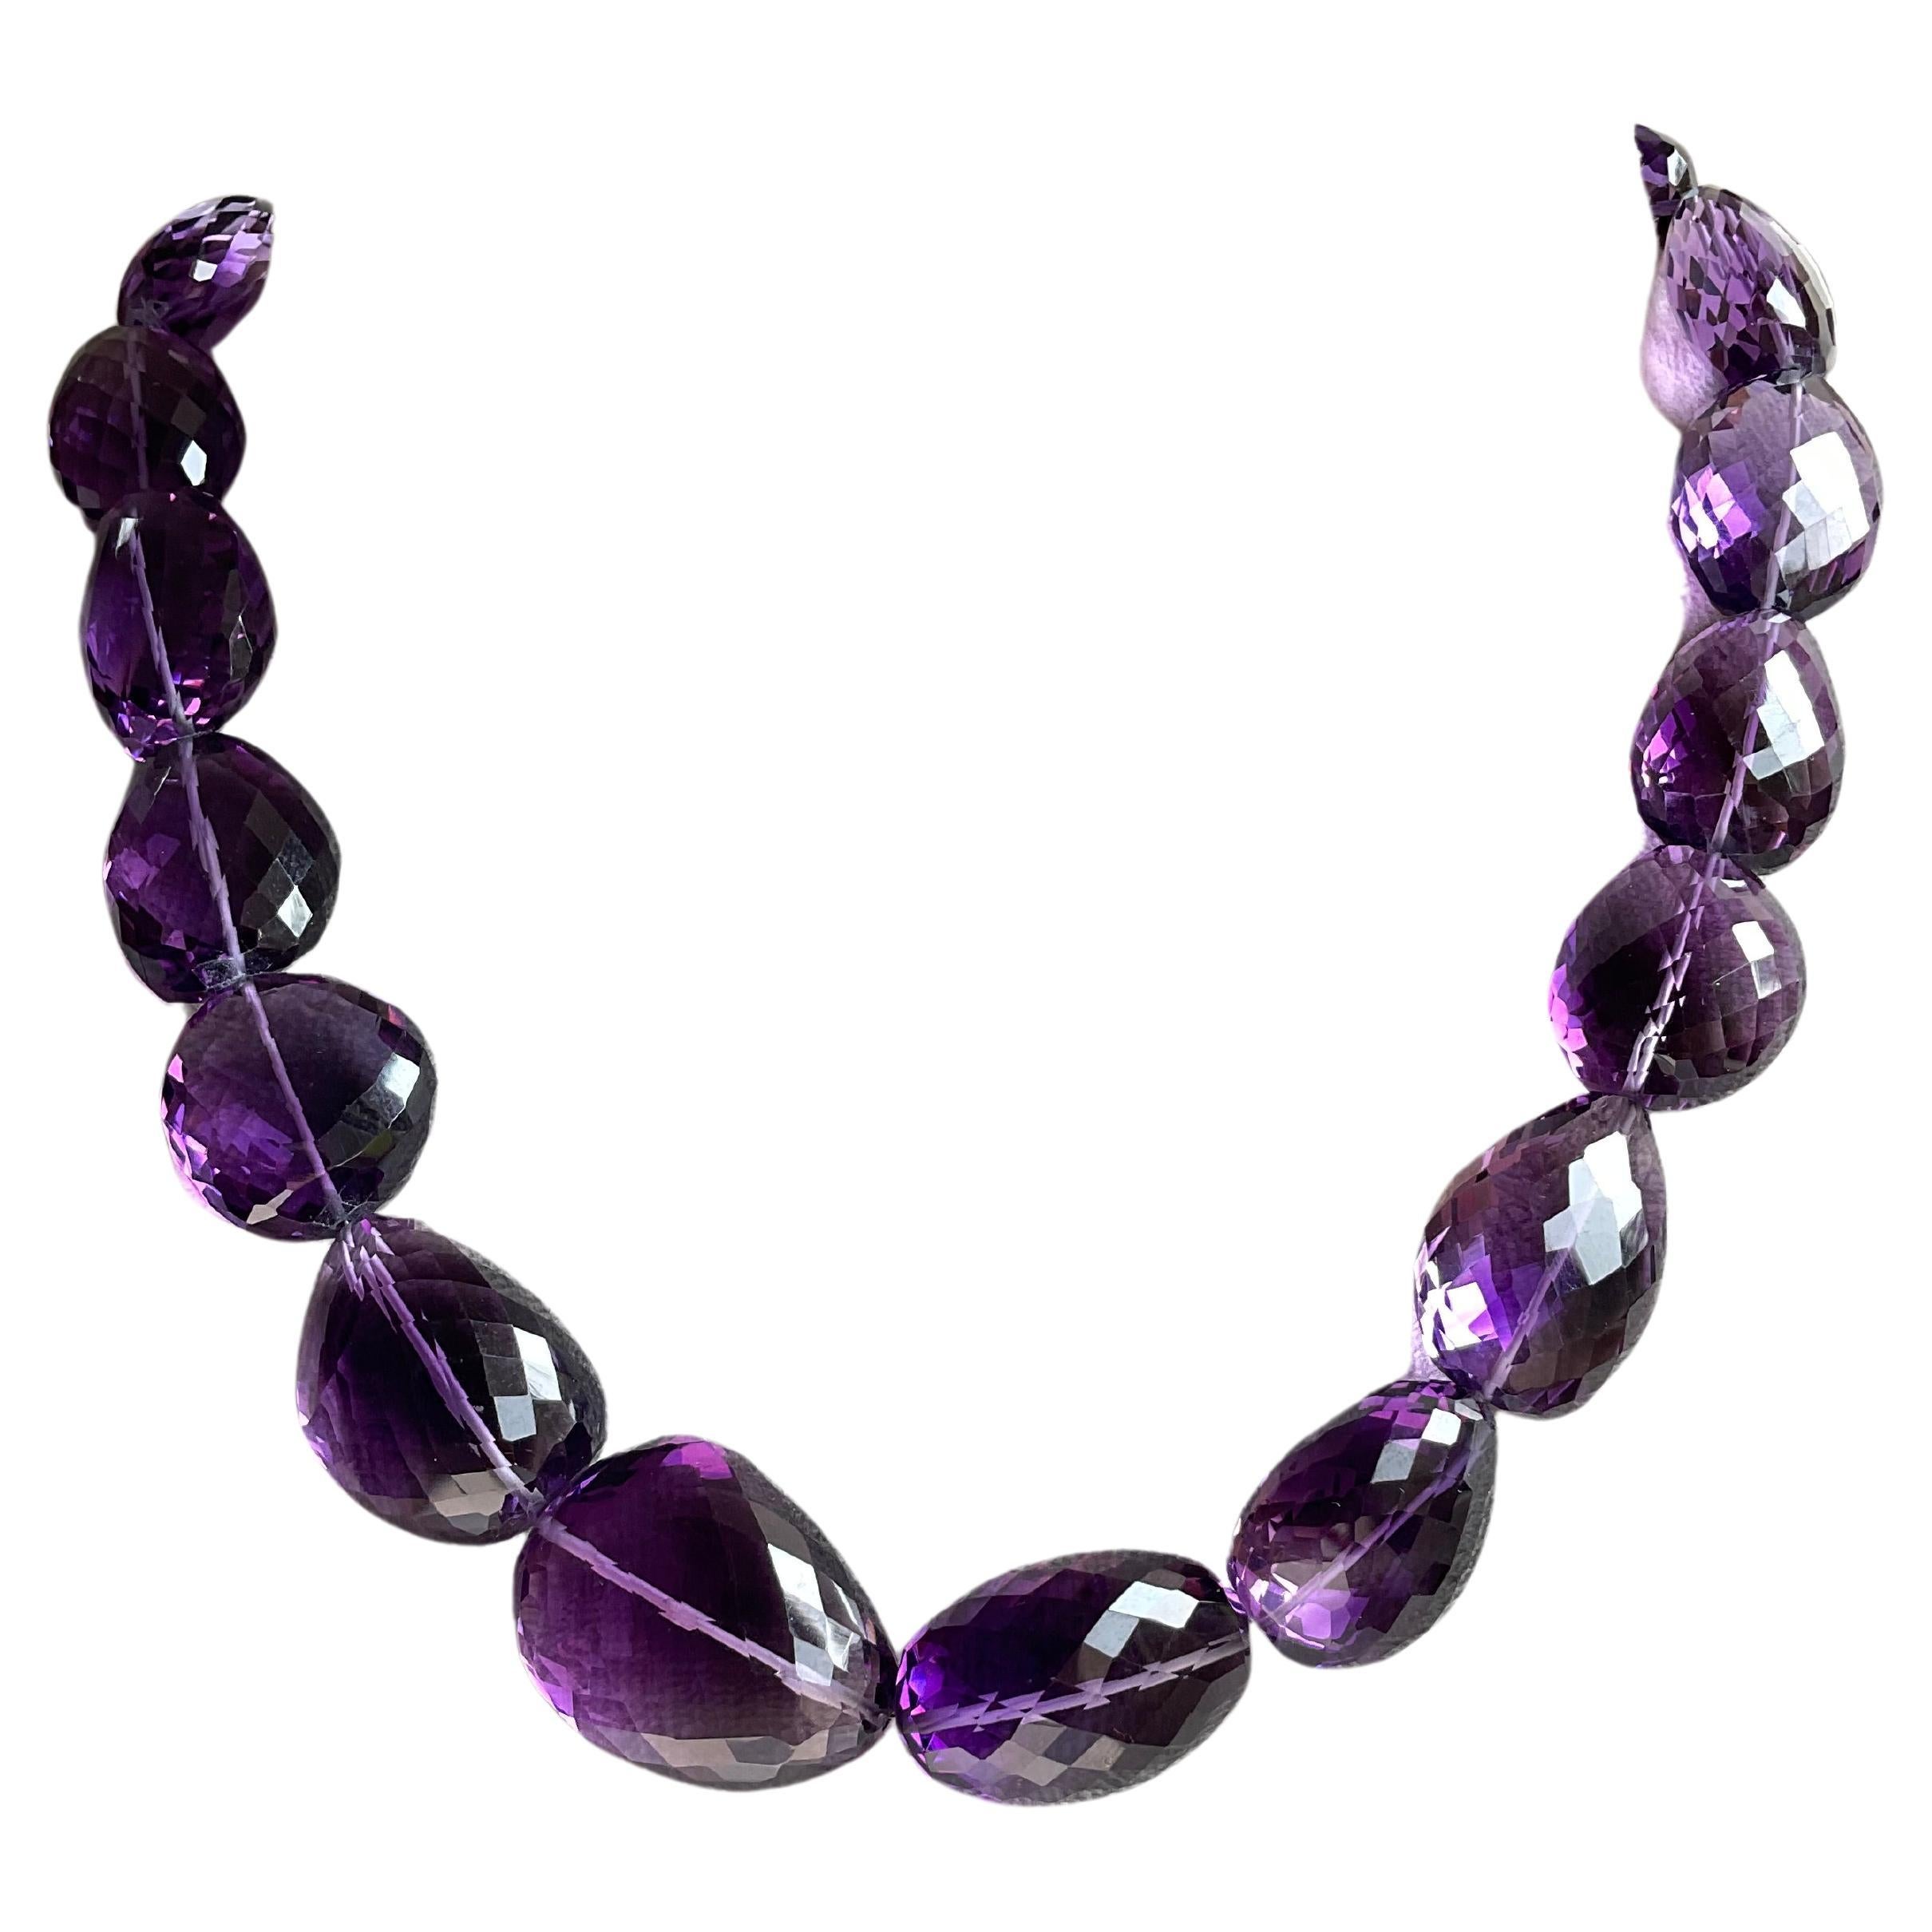 Amethyst Quartz Beaded Tumbled Faceted high Jewelry Necklace Gem Natural Quality